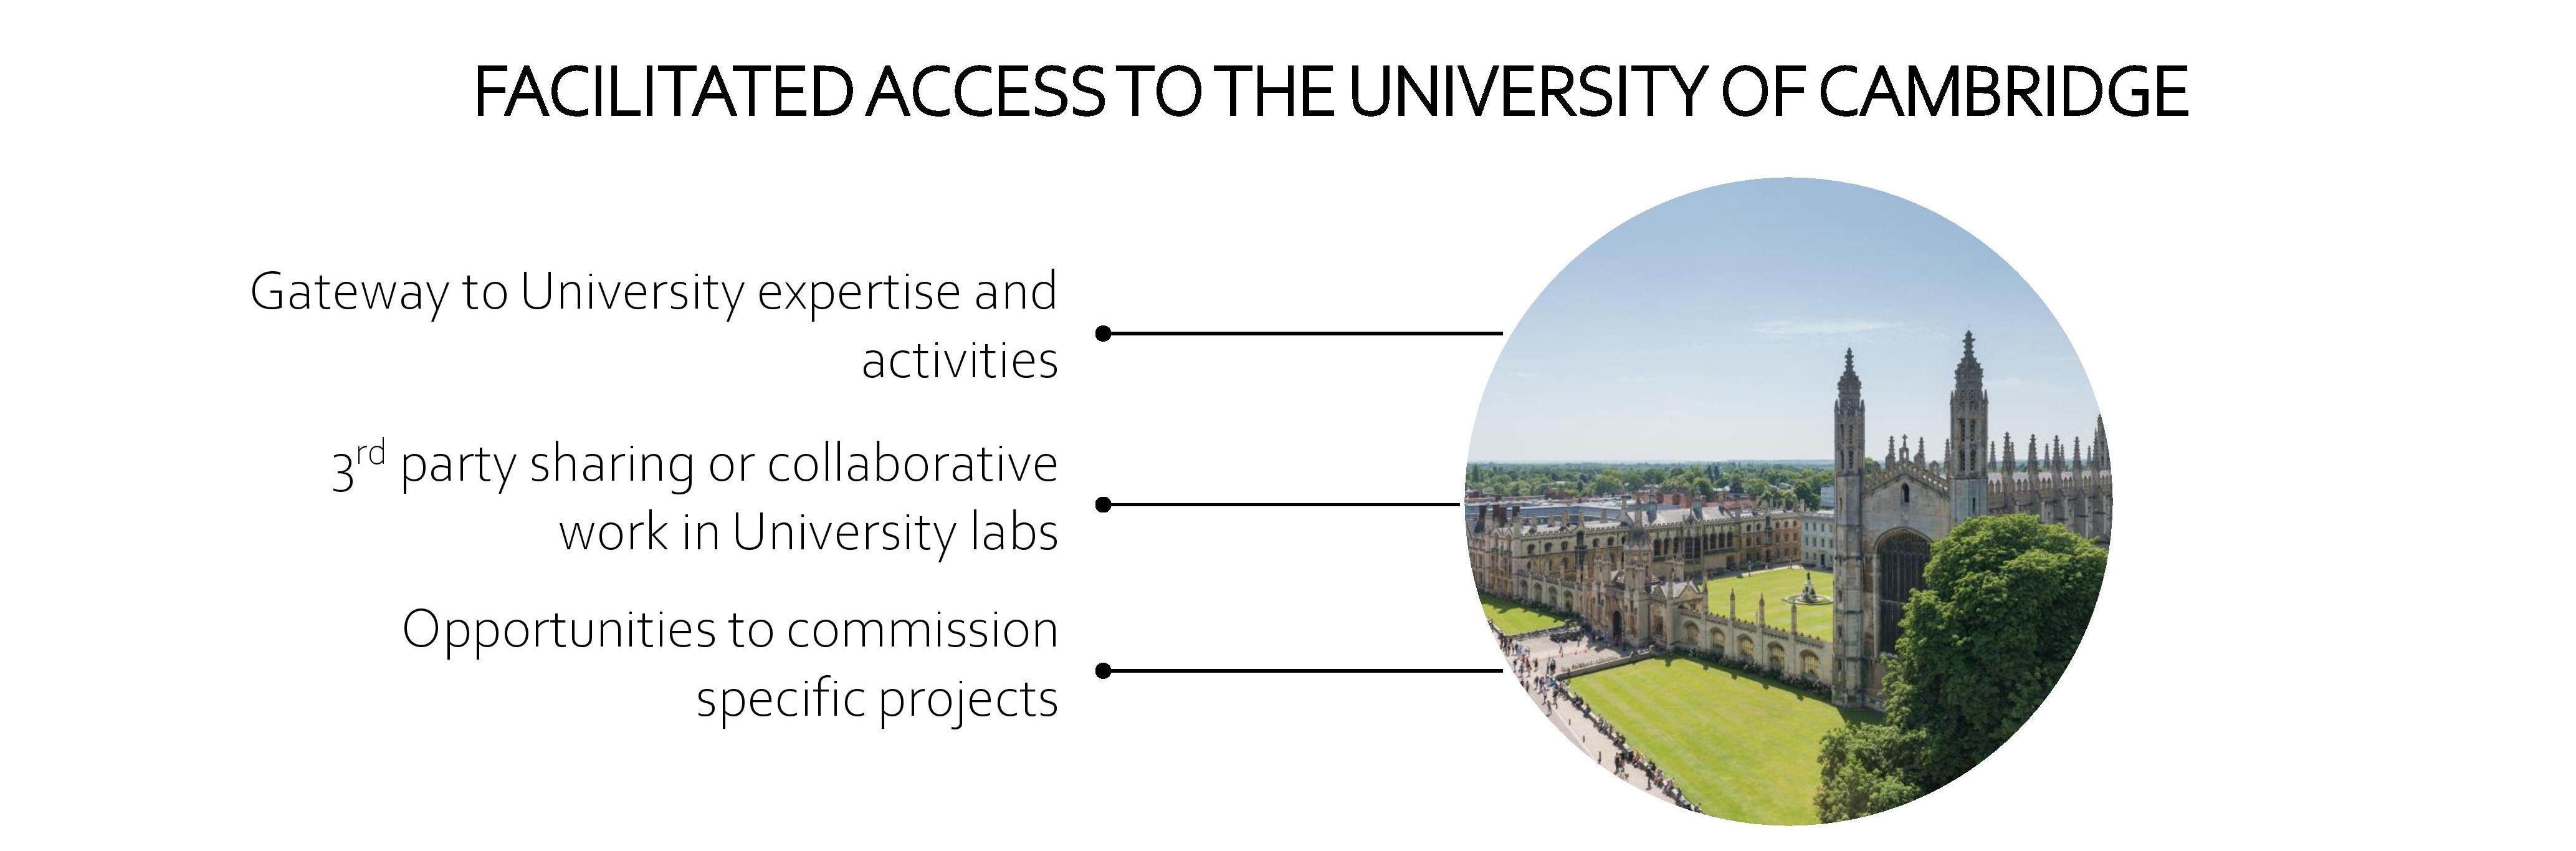 FACILITATED ACCESS TO THE UNIVERSITY OF CAMBRIDGE. Gateway to University expertise and activities. 3rd party sharing or collaborative work in University labs. Opportunities to commission specific projects